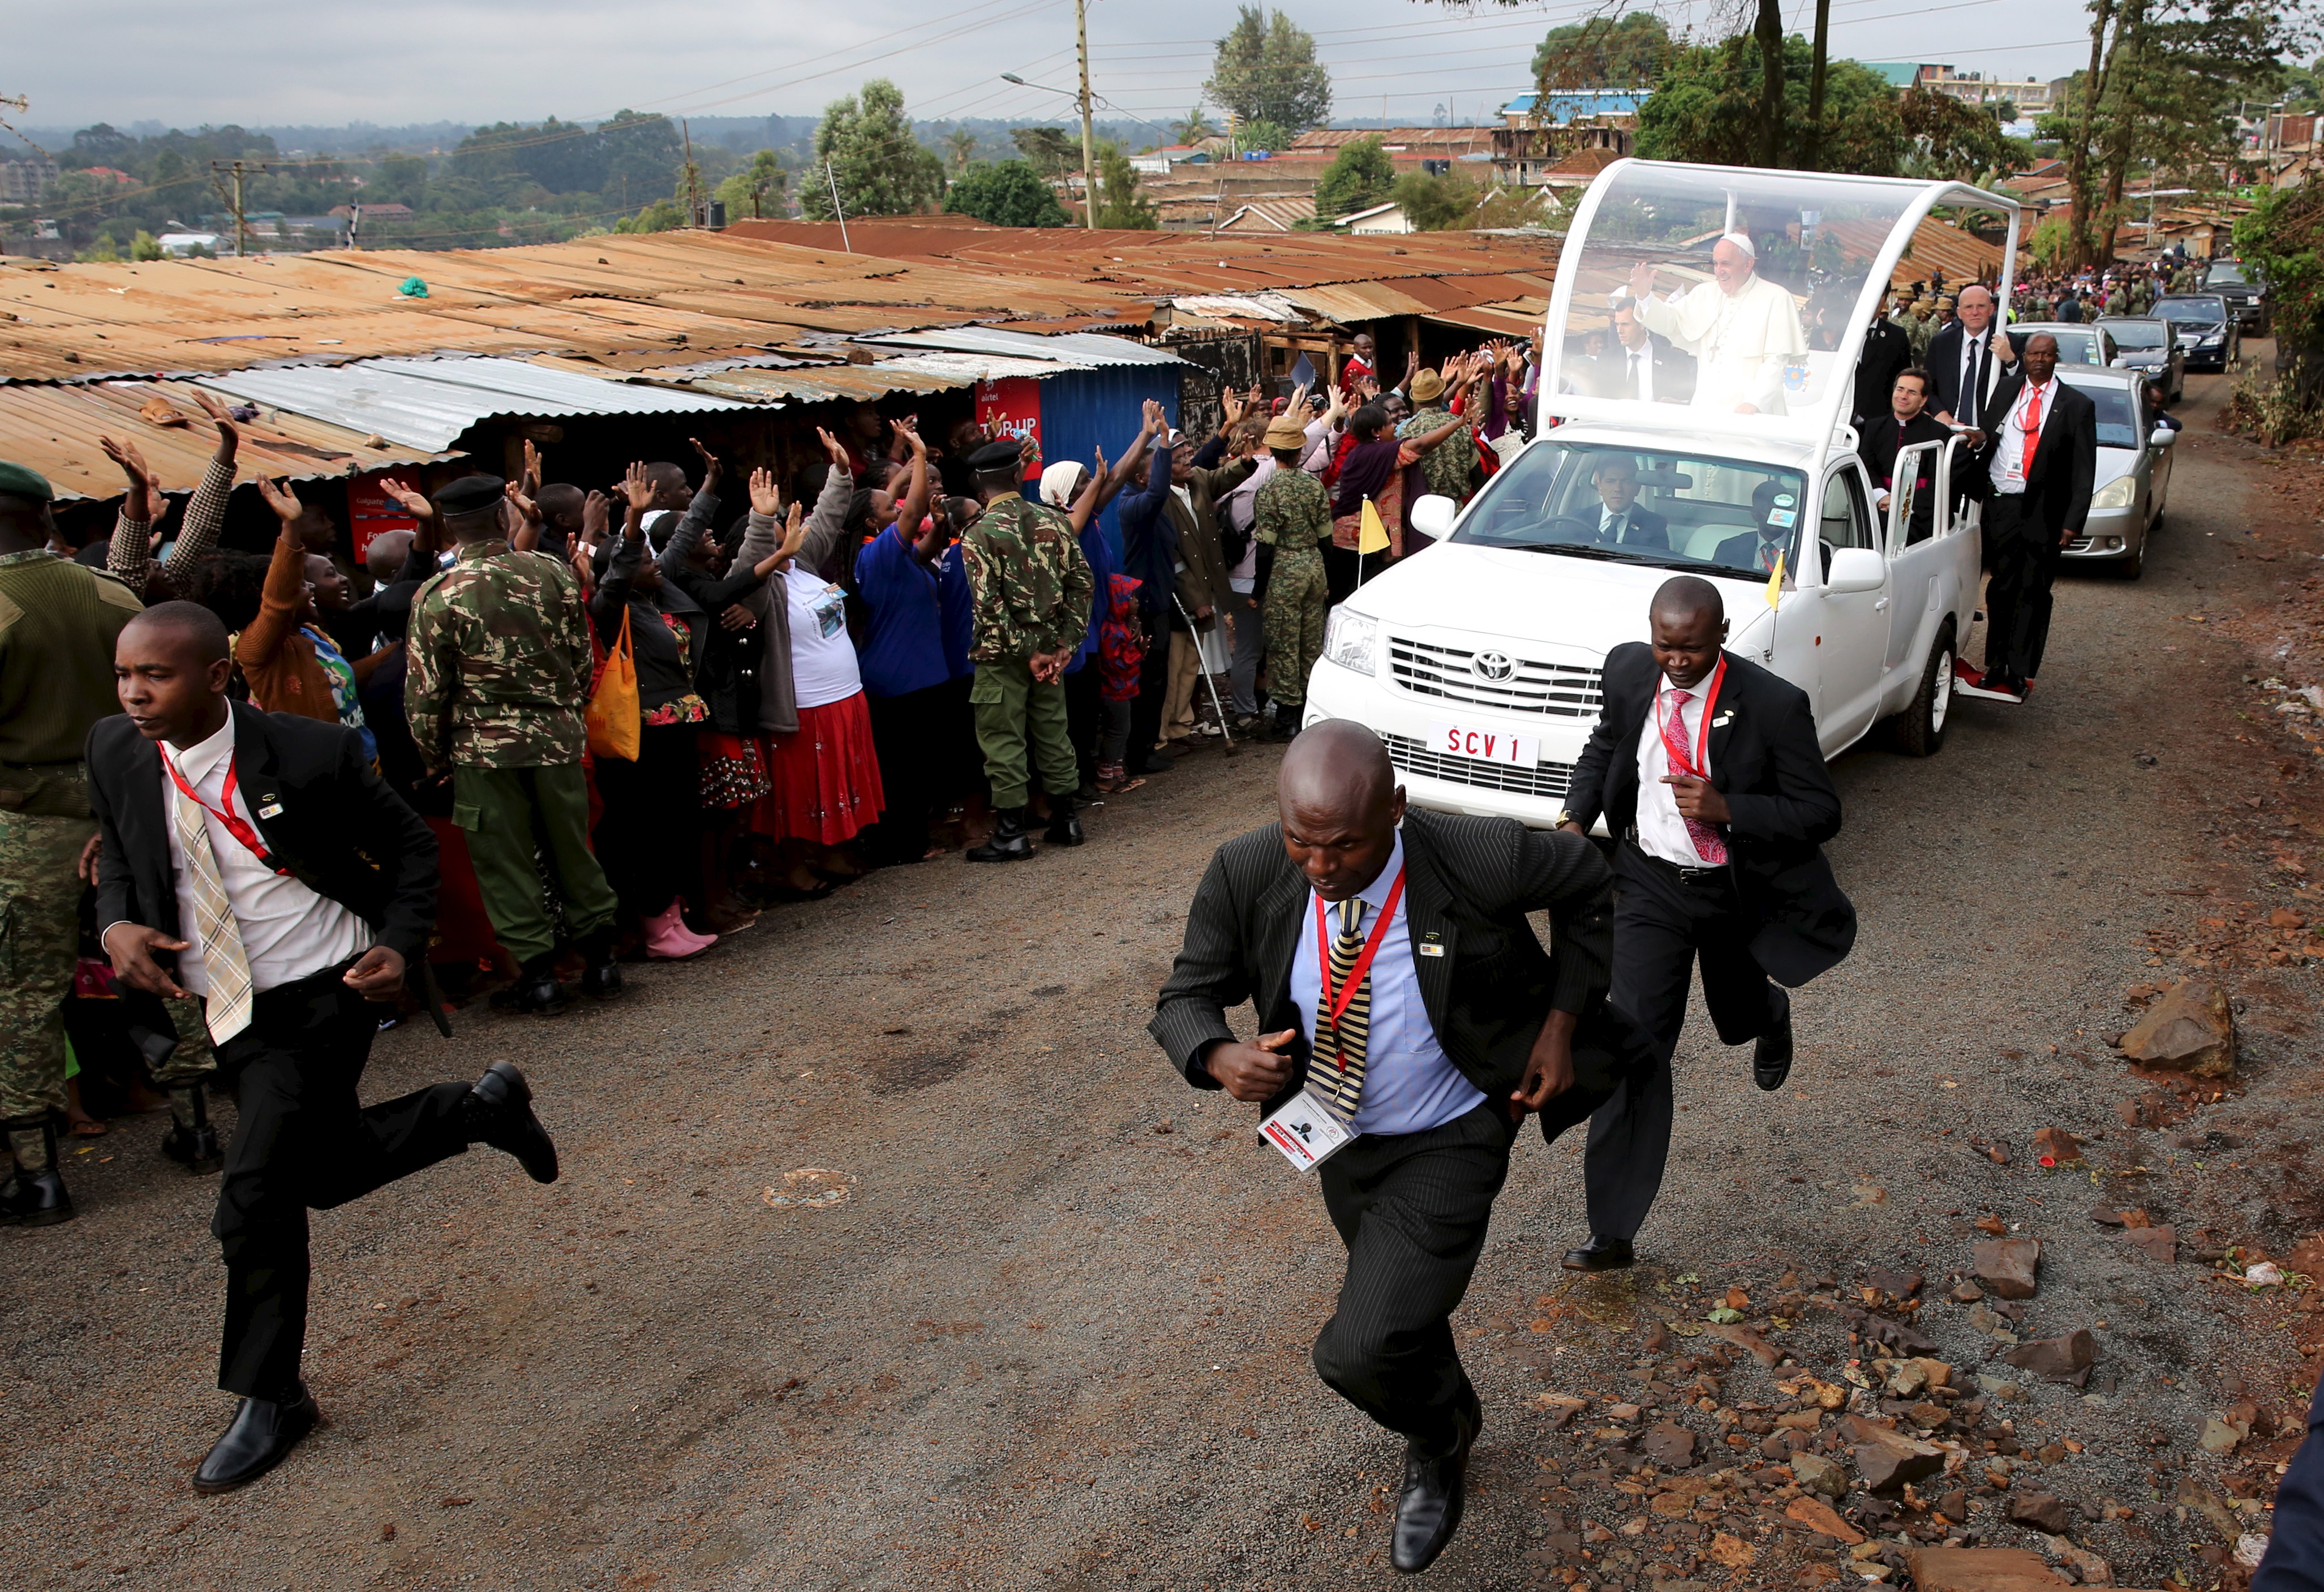 Pope Francis waves as he arrives at the Kangemi slums on the outskirts of Kenya's capital, Nairobi on Nov. 27, 2015.